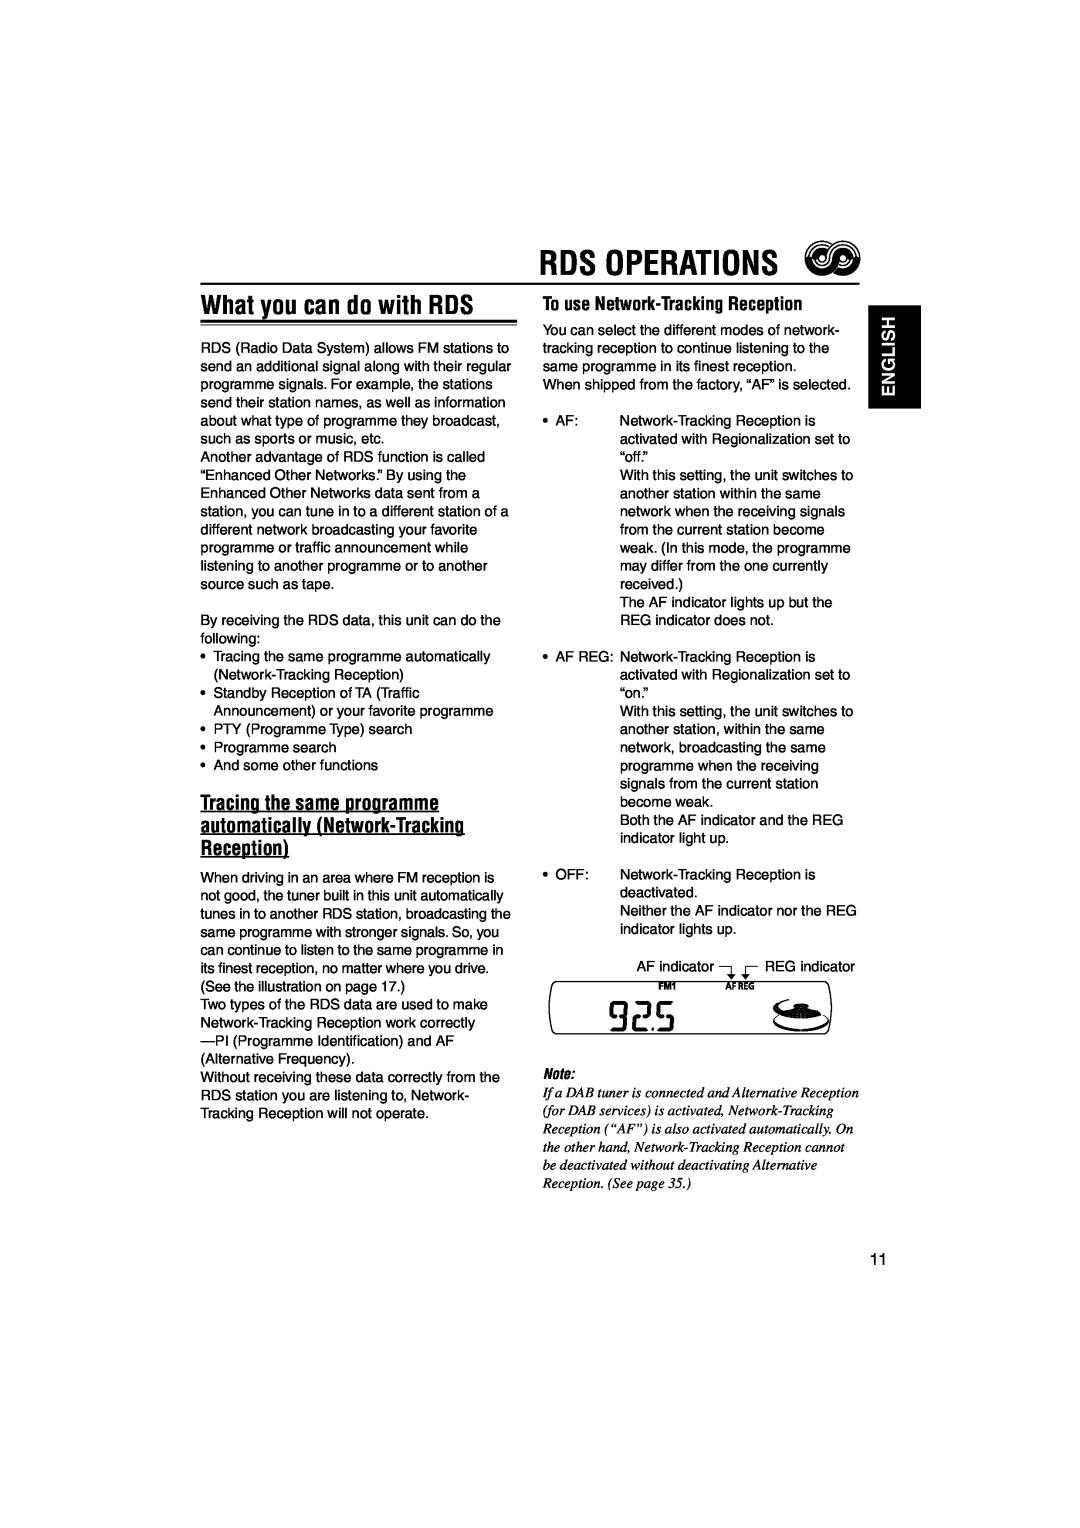 JVC KS-FX842R, GET0140-001A manual Rds Operations, What you can do with RDS, To use Network-Tracking Reception, English 